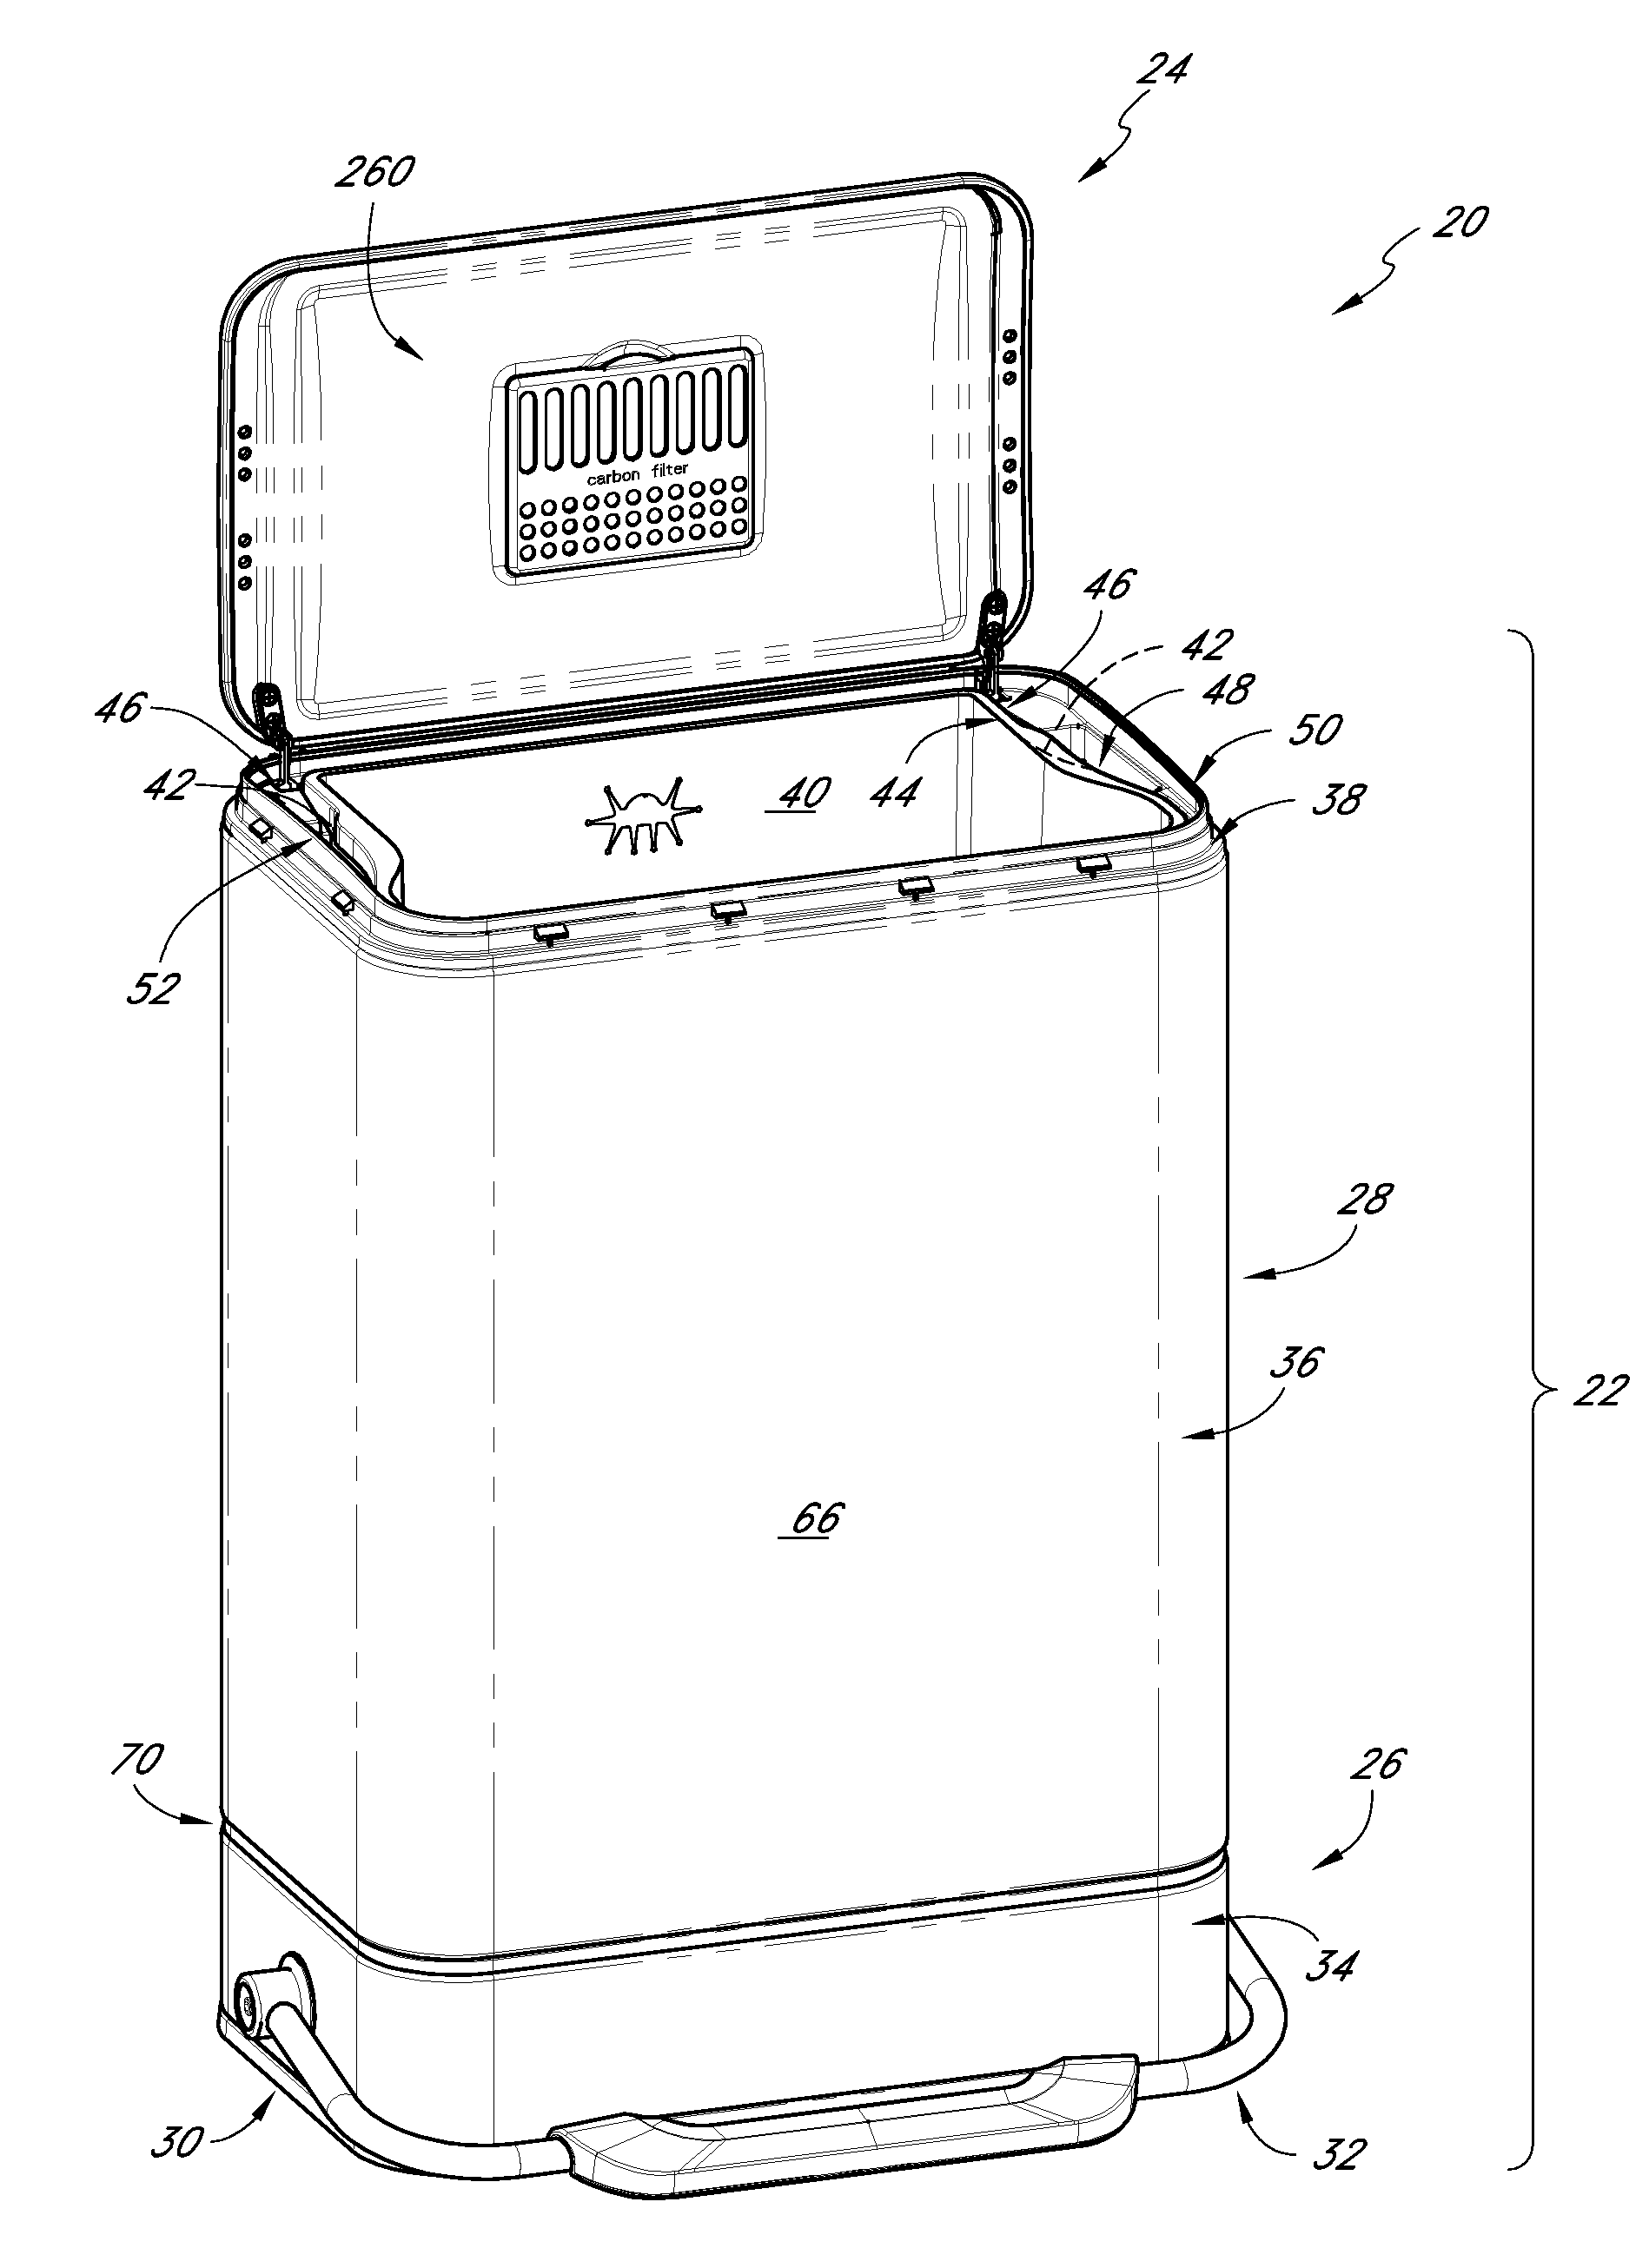 Receptacle with motion damper for lid, air filtration device, and Anti-sliding mechanism